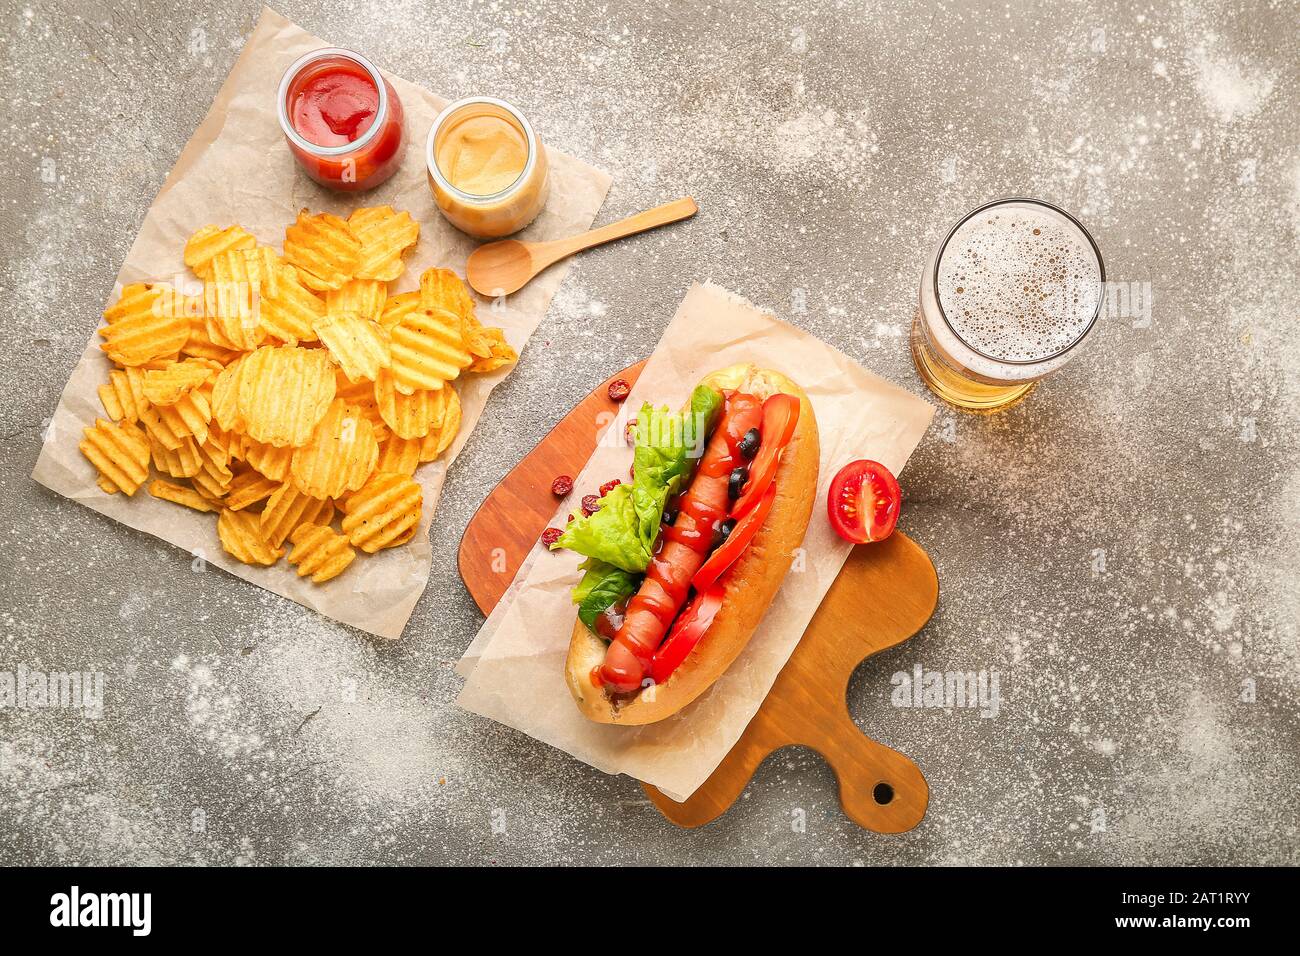 Tasty hot dog, chips and beer on table Stock Photo